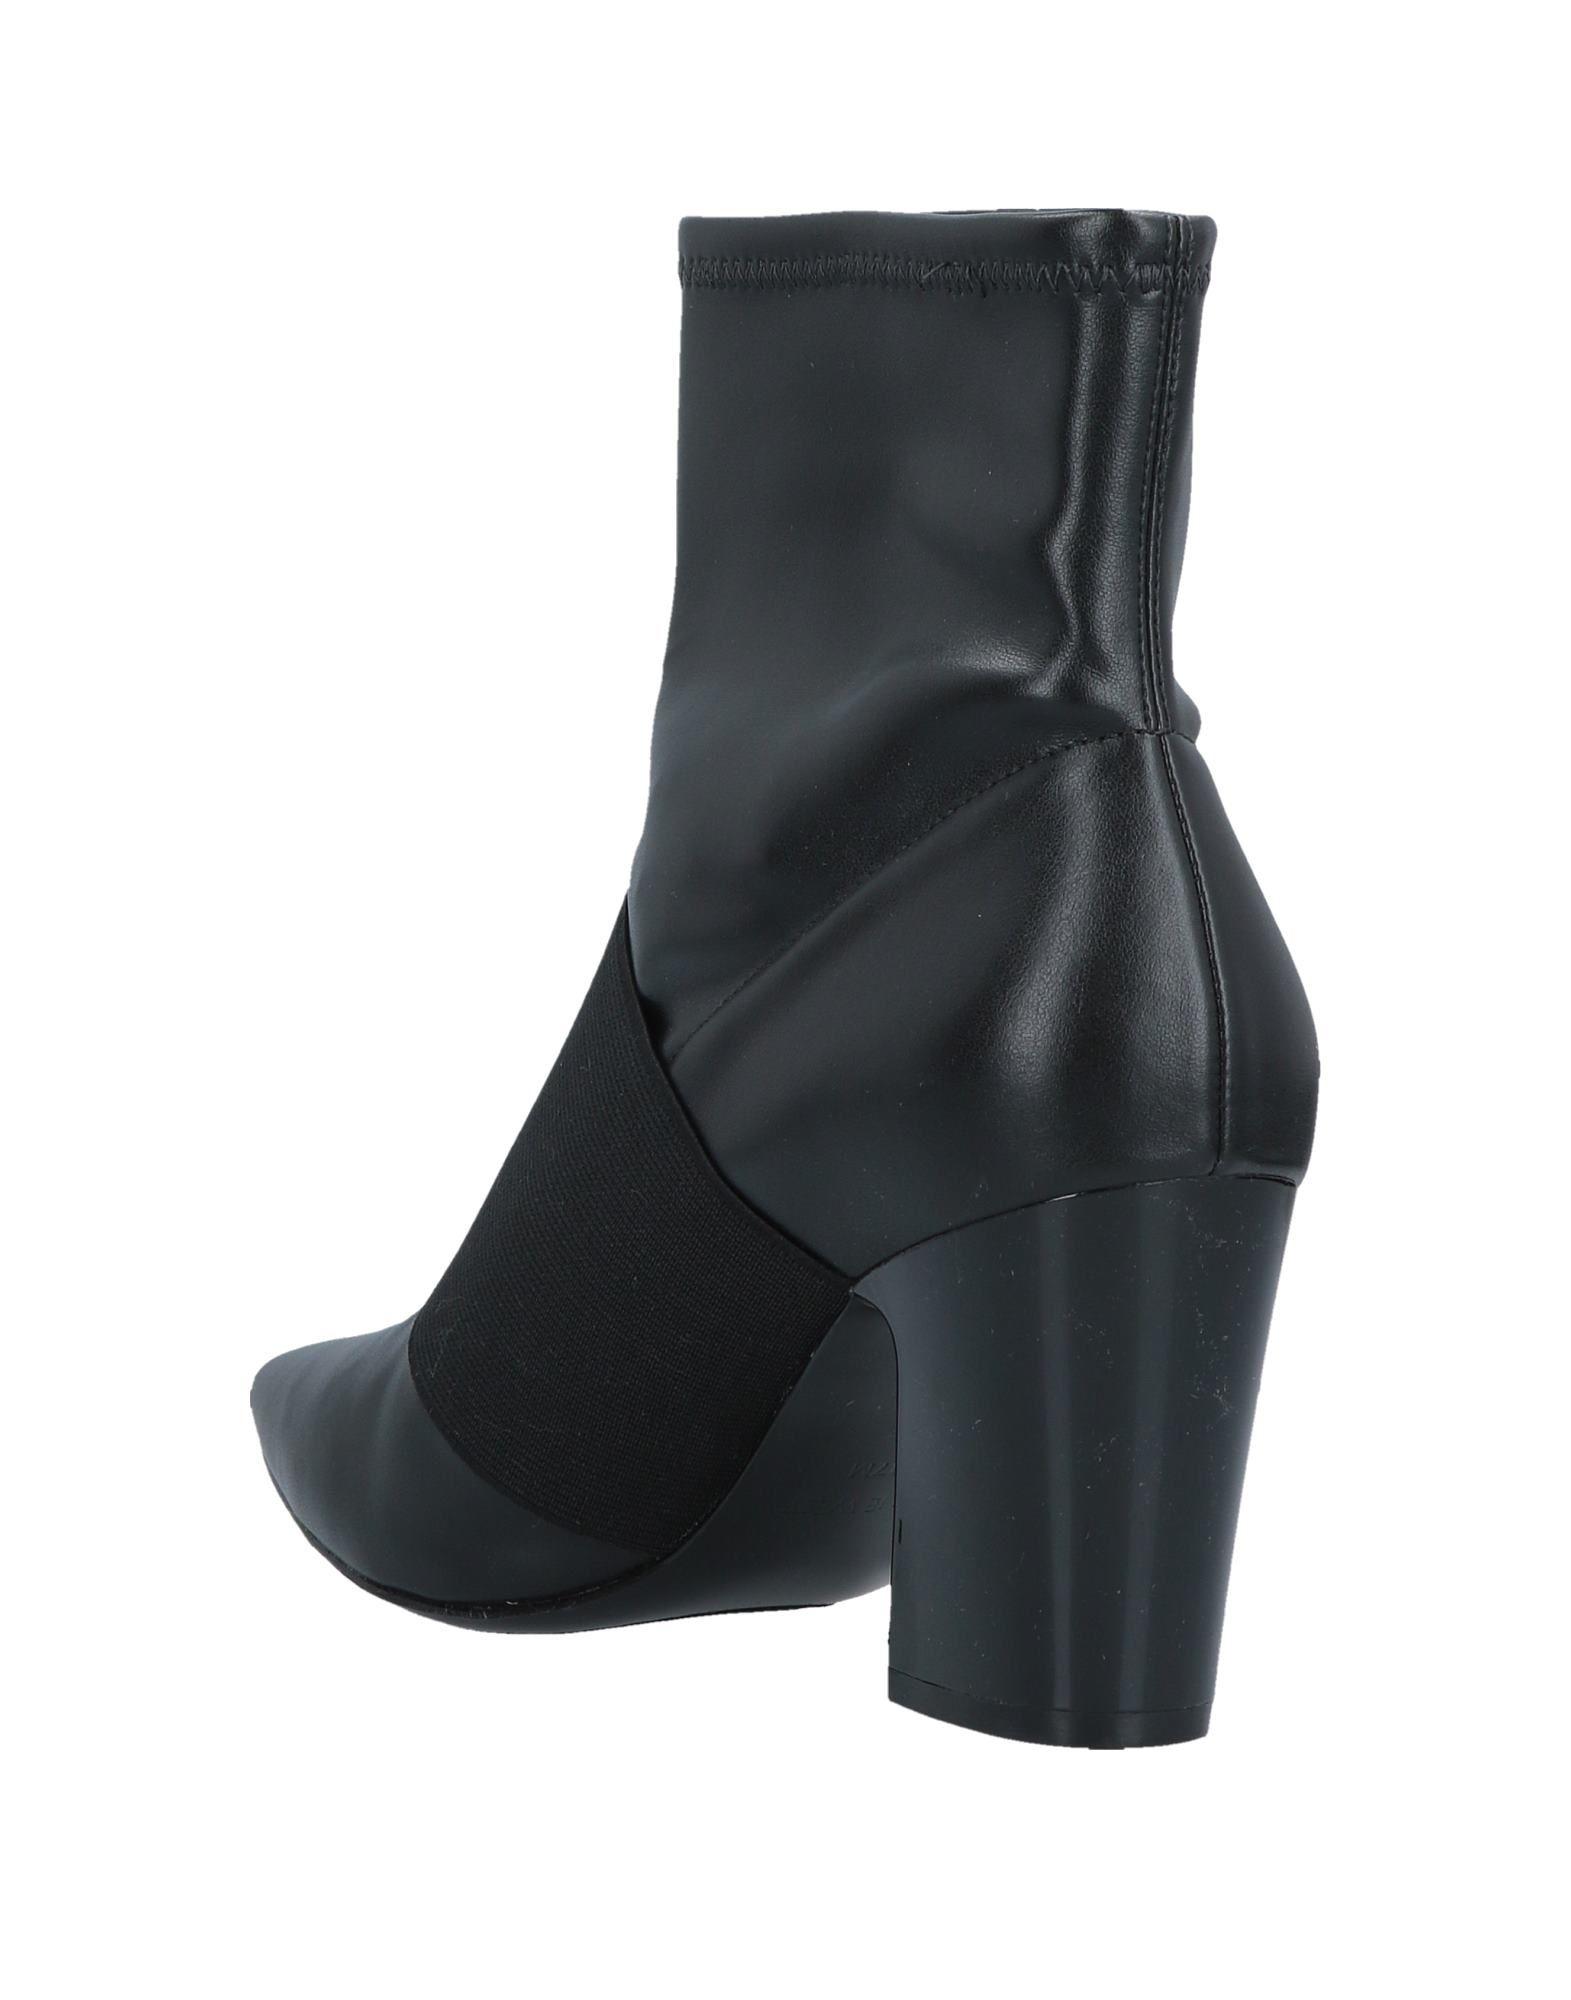 Nine West Leather Ankle Boots in Black - Lyst